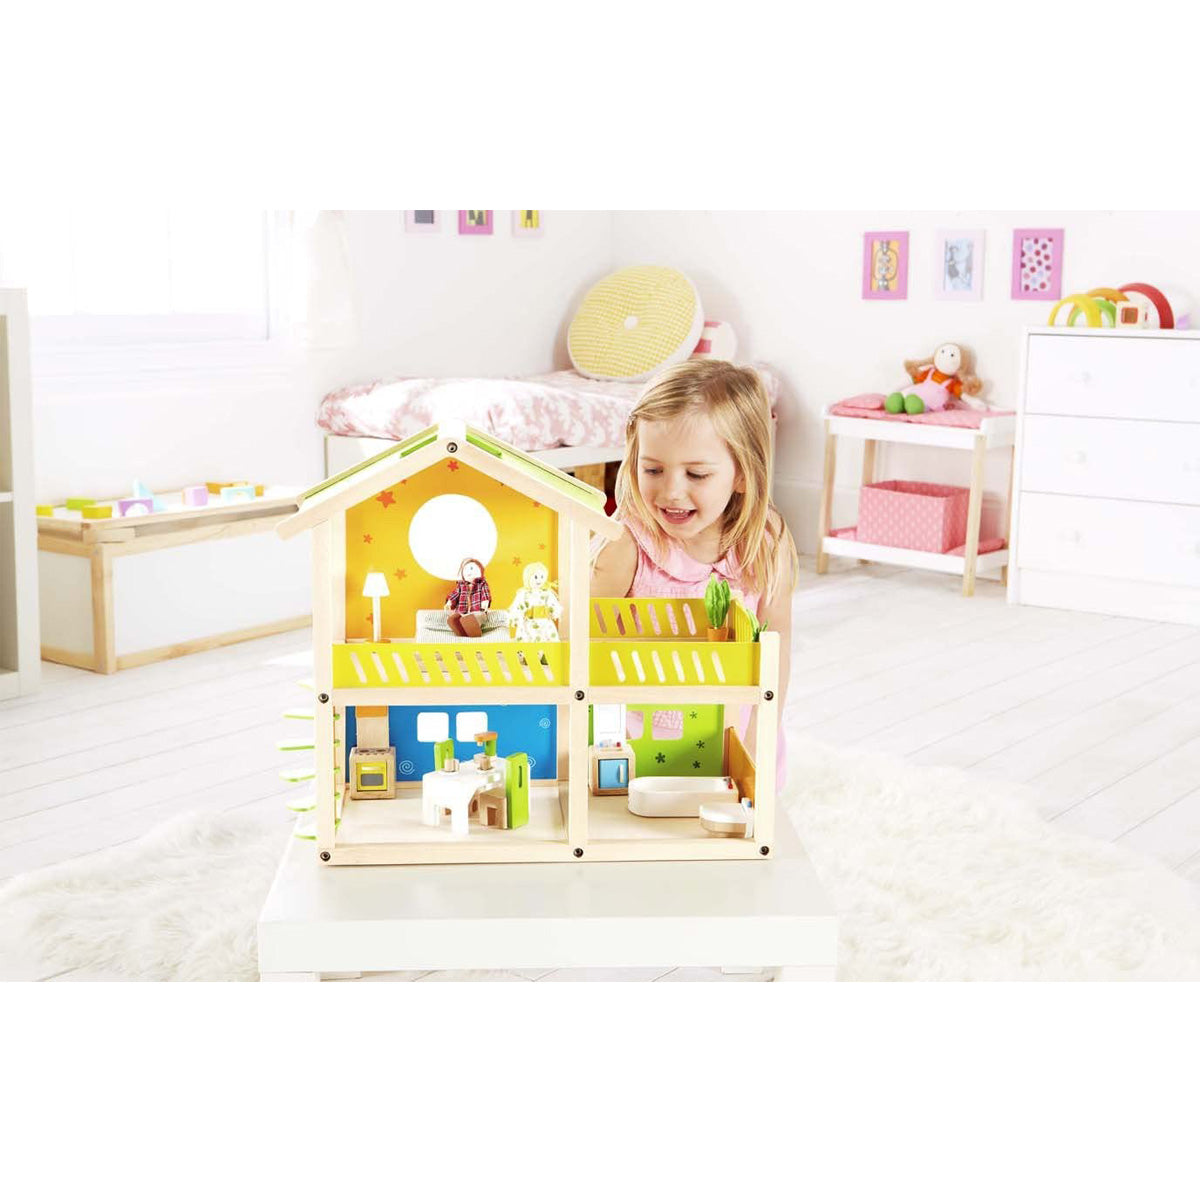 (OPEN BOX)  Hape Happy Villa Kids Wooden Doll House Set | 2 Story Dolls Villa with Furniture and Accessories